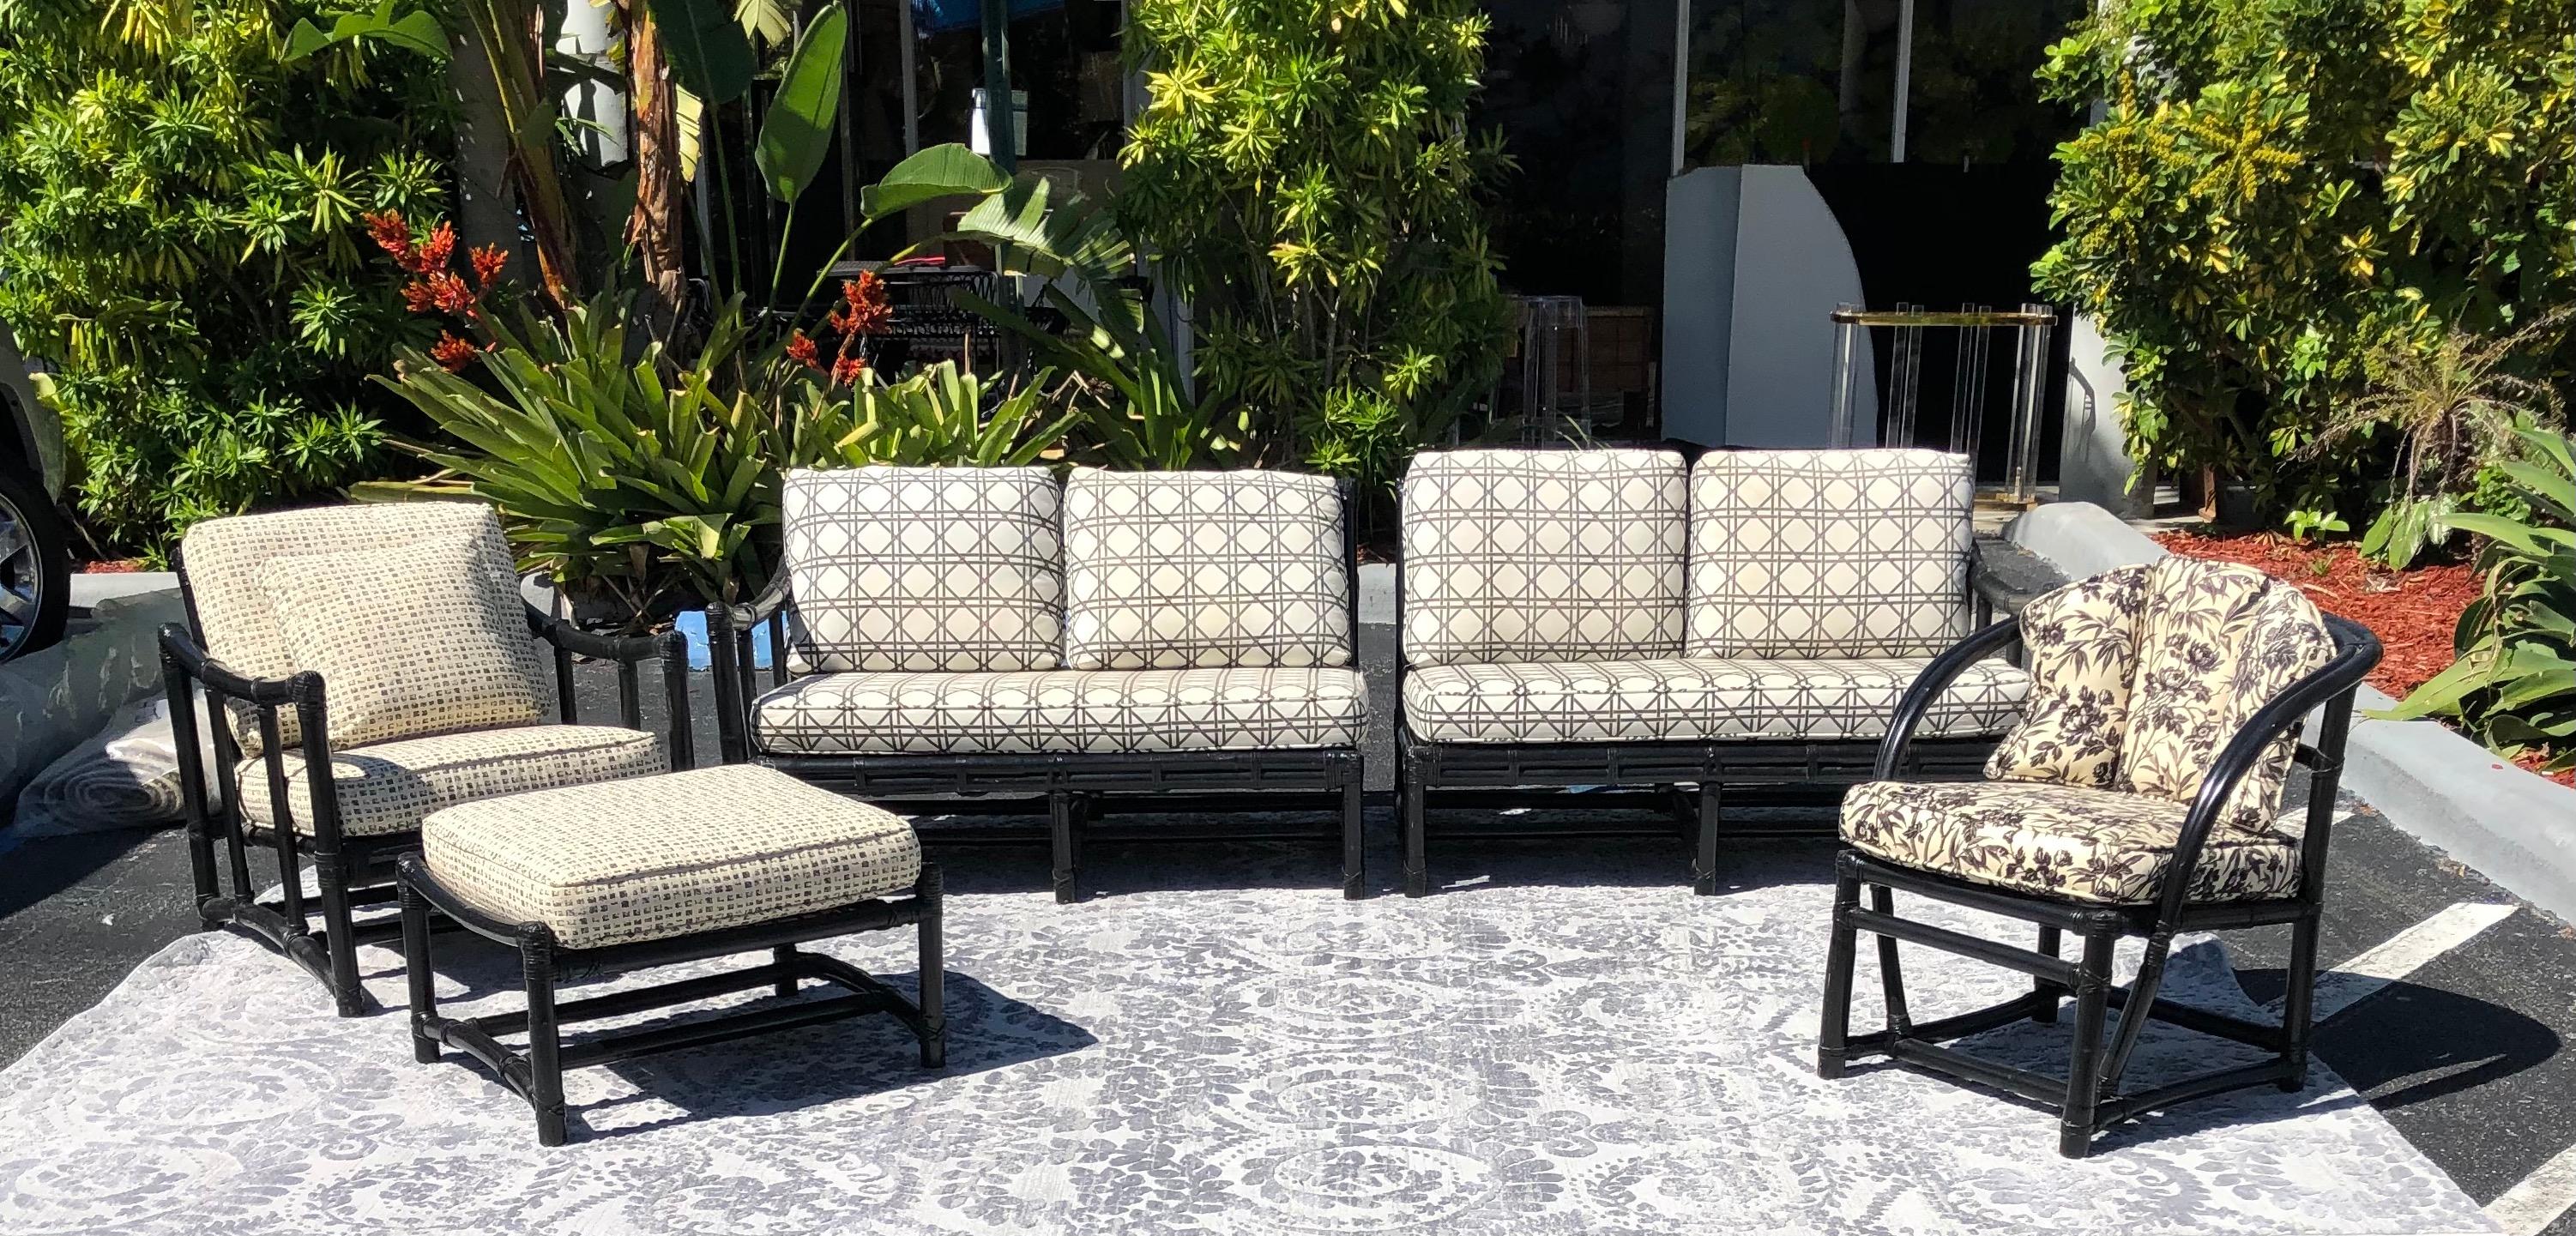 McGuire San Francisco rattan living room suite set of five

Offered for sale is a McGuire Furniture (San Francisco, CA) living room suite comprised of a two-piece sectional sofa, a club chair with an ottoman, and a single club chair. All of the